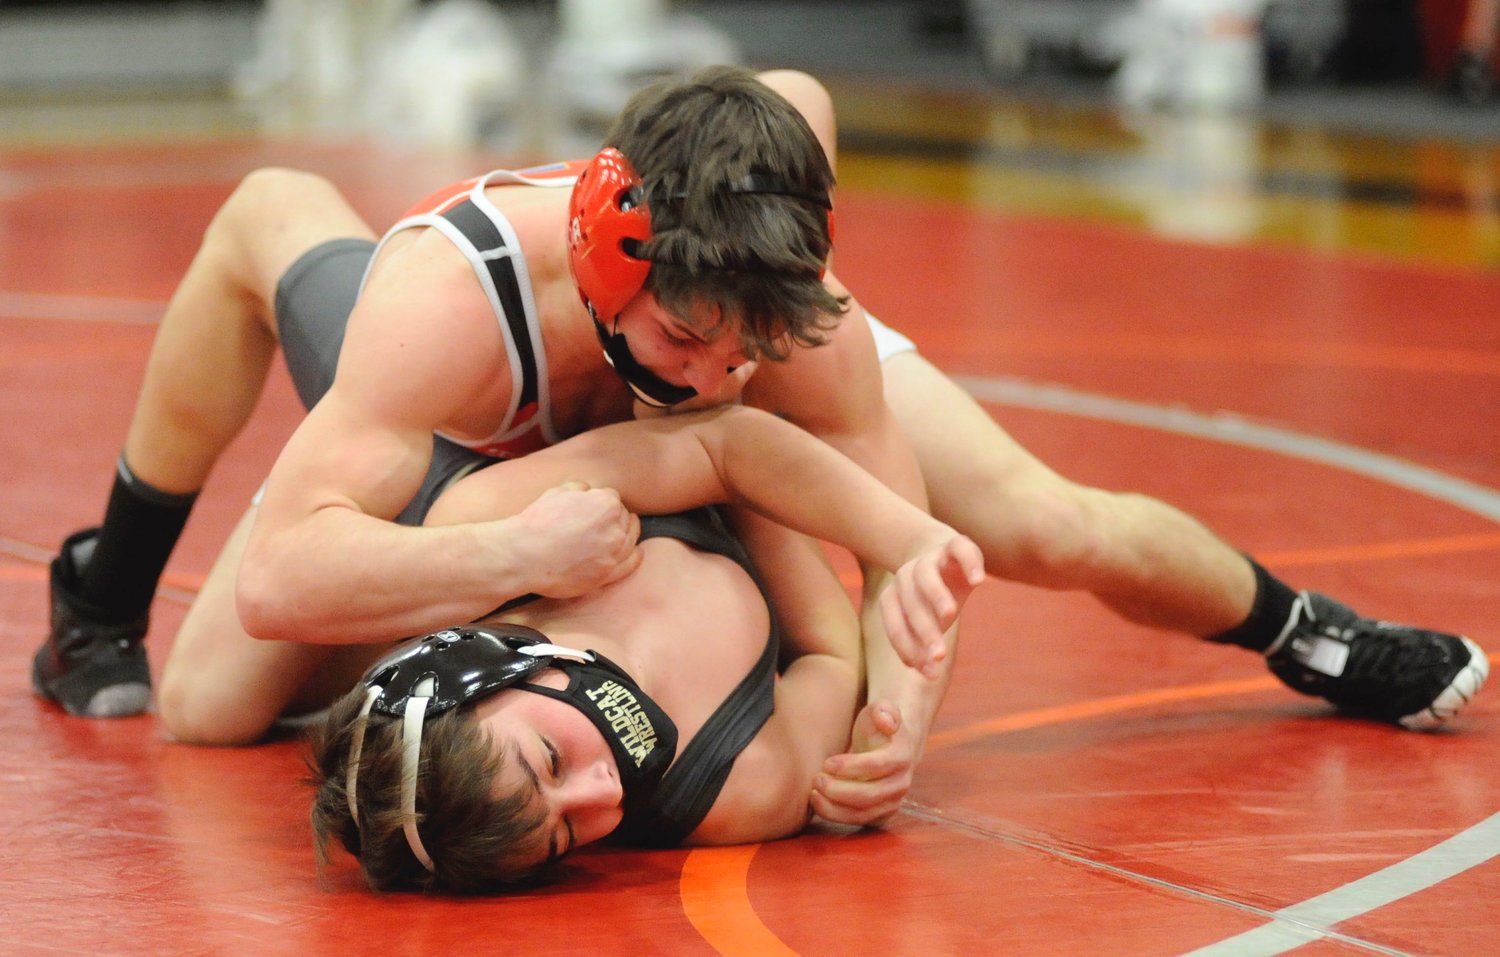 Honesdale’s Braden McLaughlin defeated his opponent in bout #8.